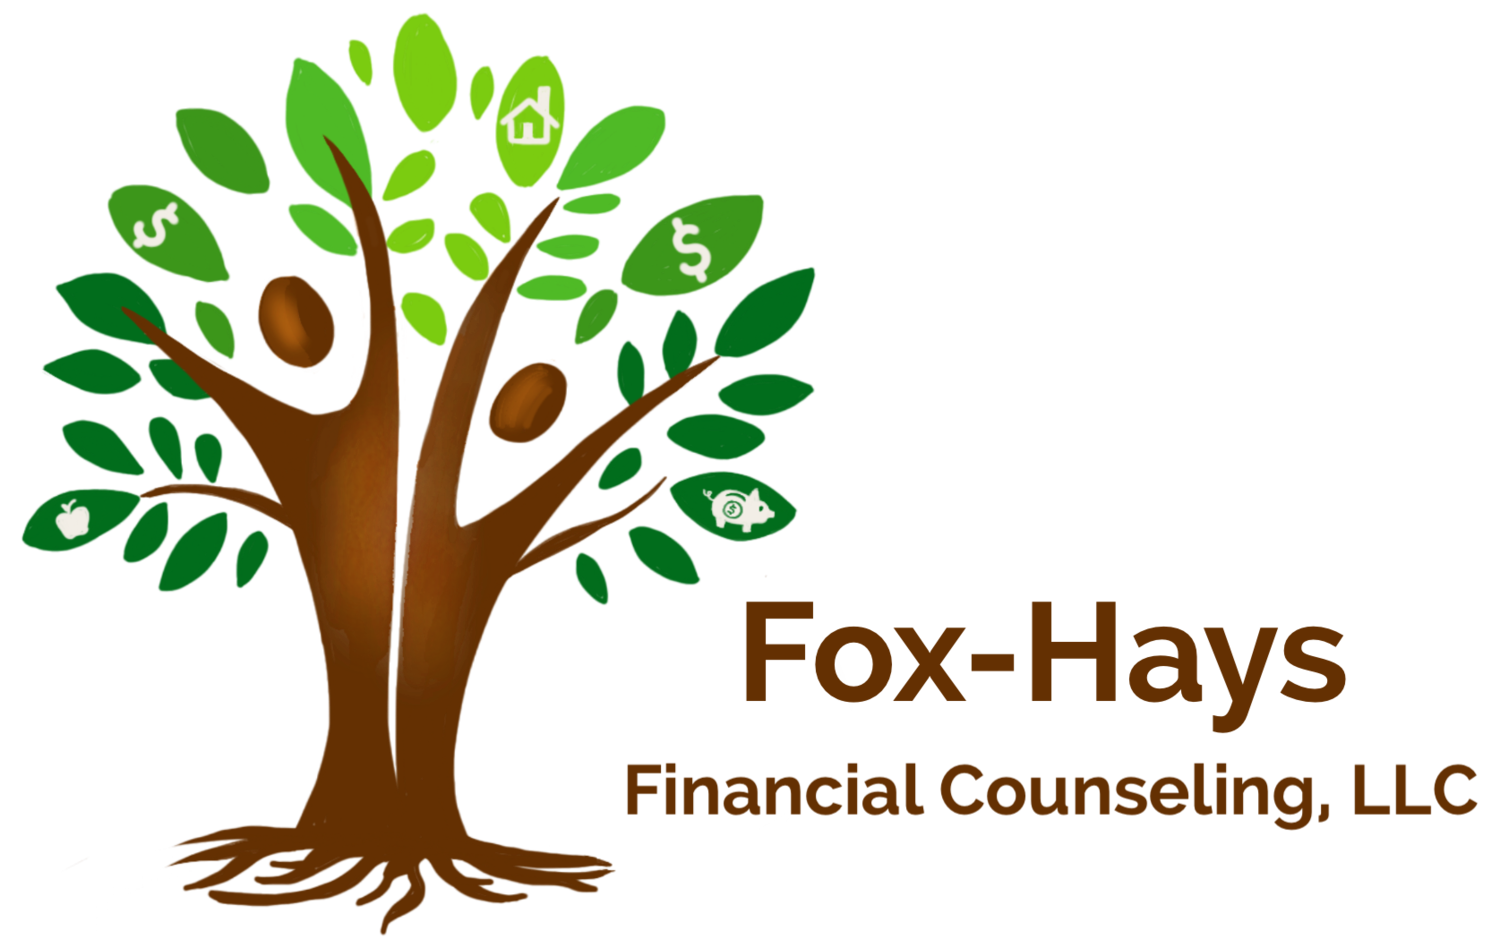 FoxHays Financial Counseling